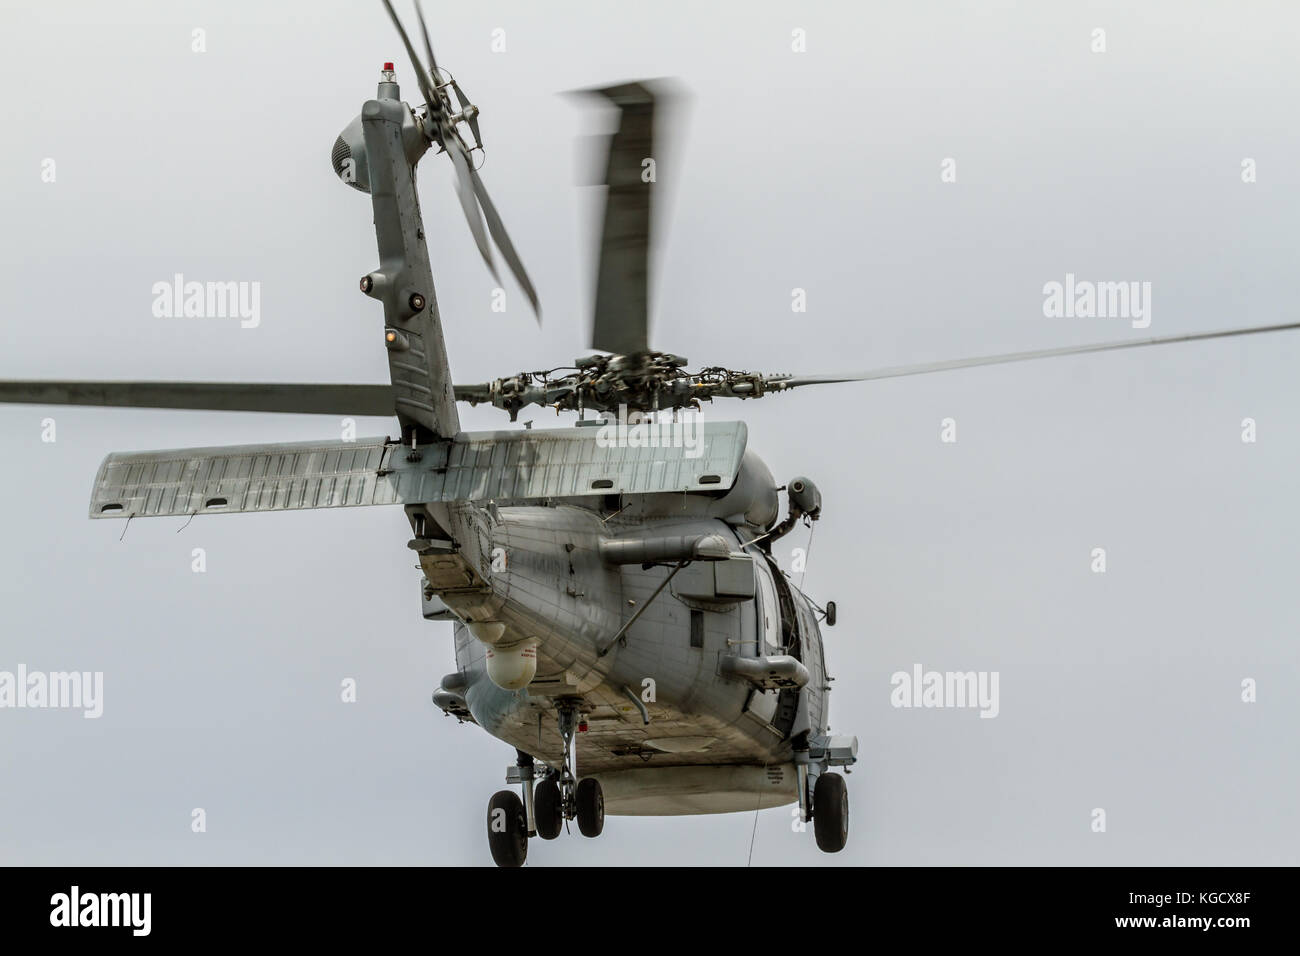 MOTRIL, GRANADA, SPAIN-JUN 09: Helicopter SH-60B Seahawk taking part in an exhibition on the 12th international airshow of Motril on Jun 09, 2017, in  Stock Photo